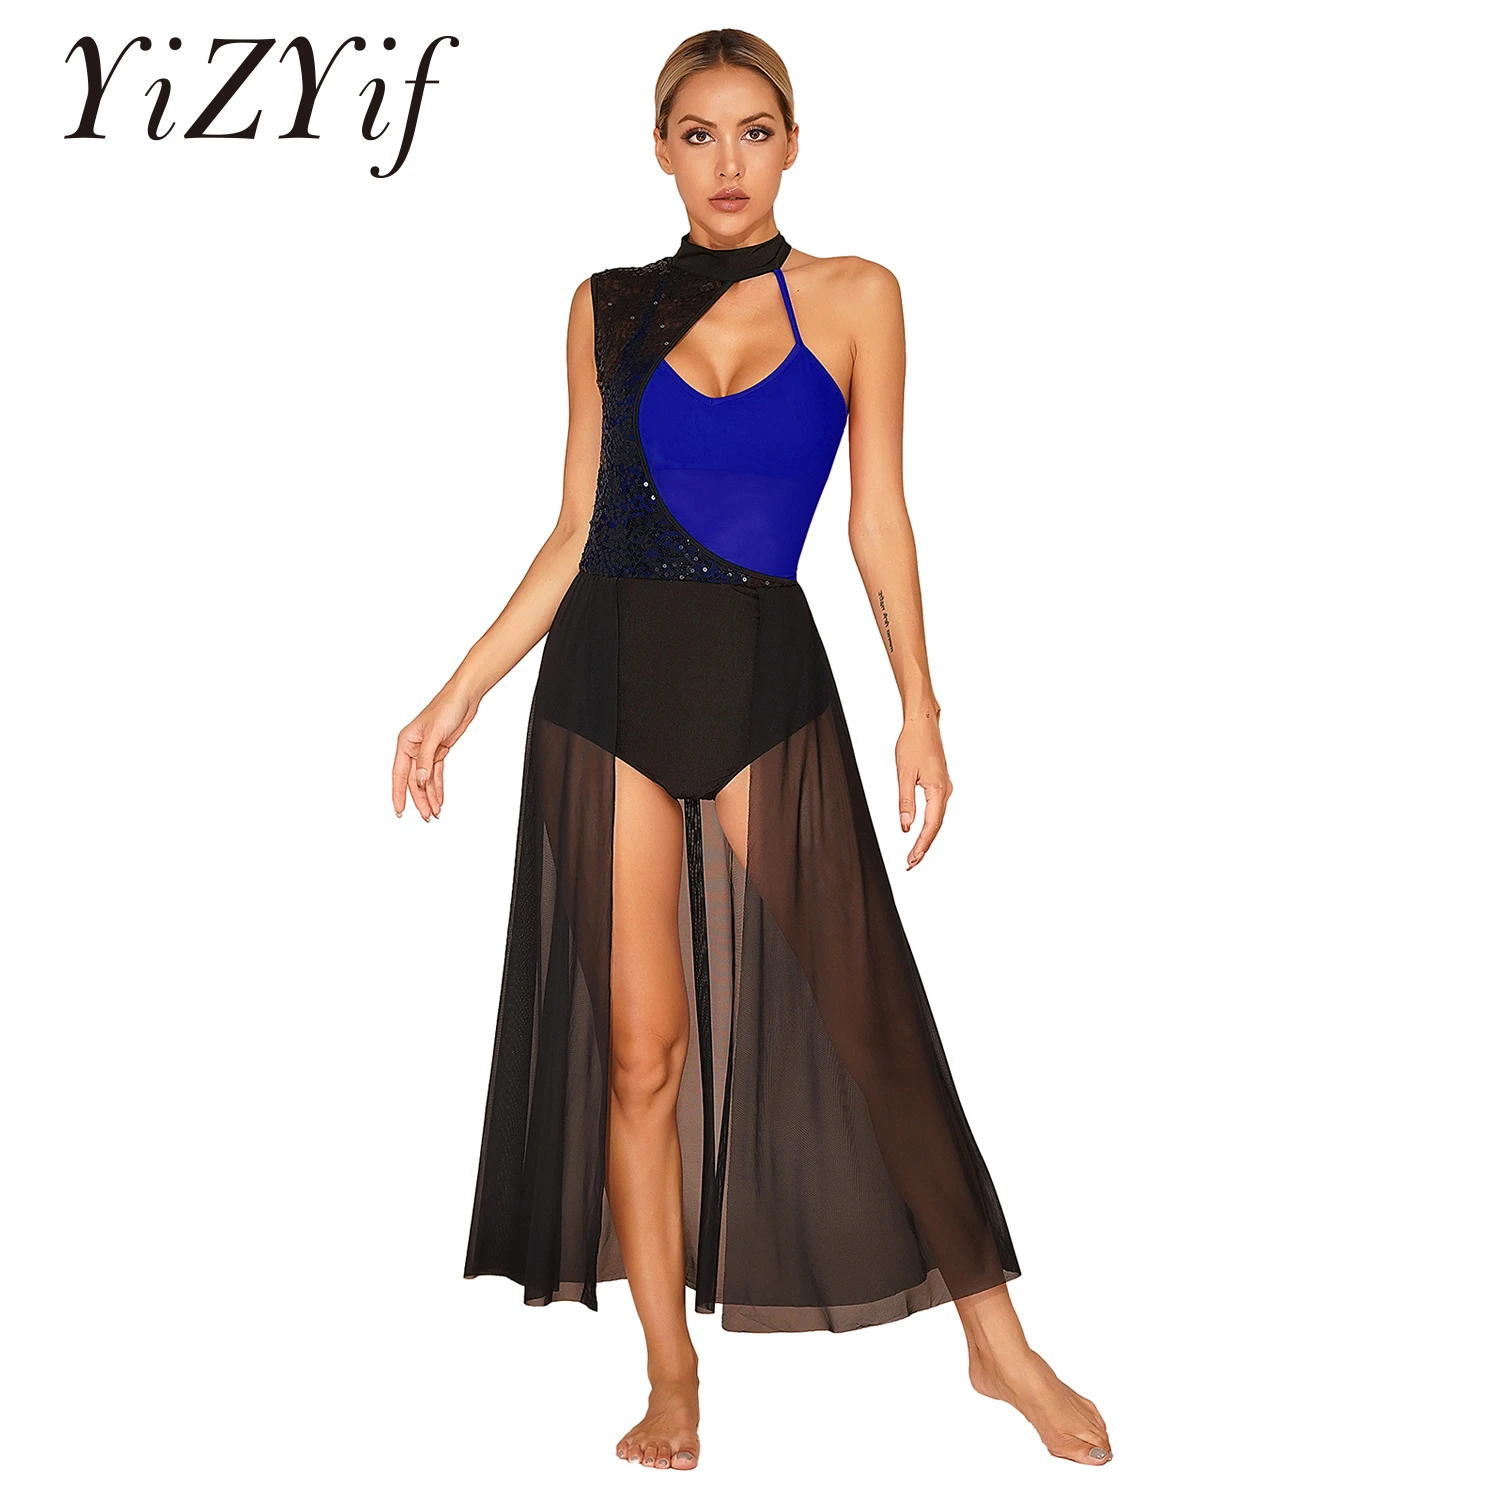 

Sequined Mesh Maxi Dress for Women Adult Ballet Dance Leotard Dress Lyrical Contemporary Dancing Stage Performance Costumes